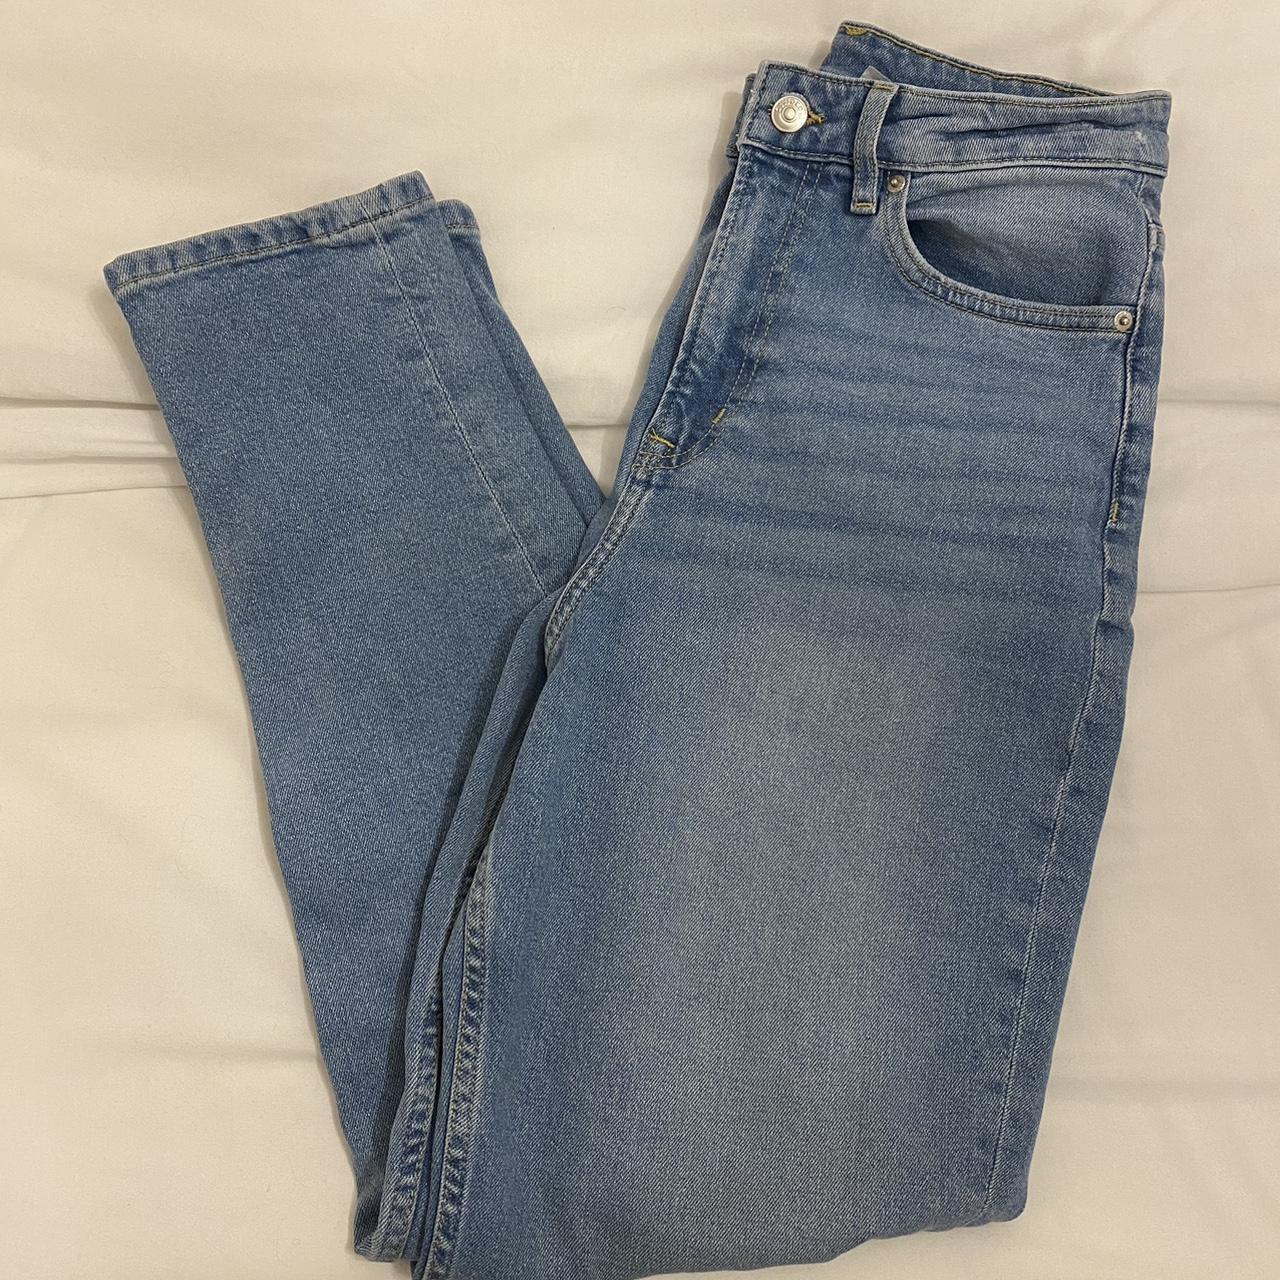 H and m jeans Light wash Size 6 High waisted... - Depop